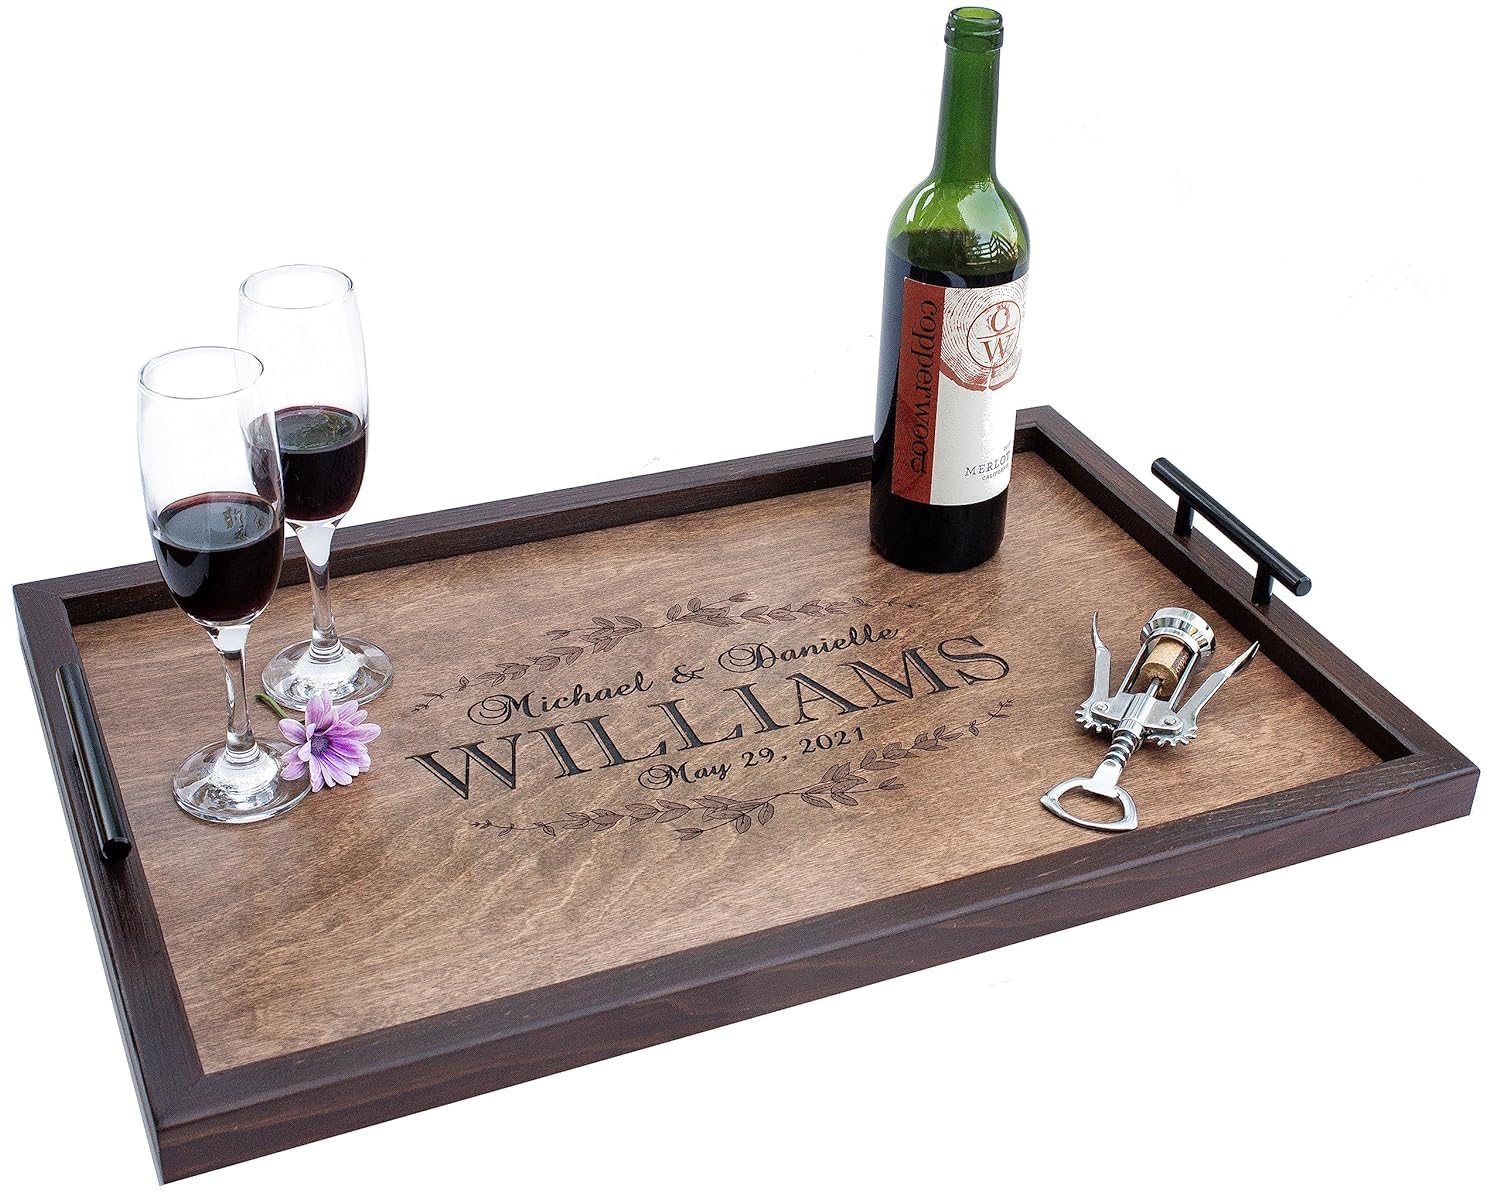 Serving tray with handles personalized wood-wedding gift-anniversary gift-wooden tray-couple names tray-engagement gift-engraved wedding gift (12